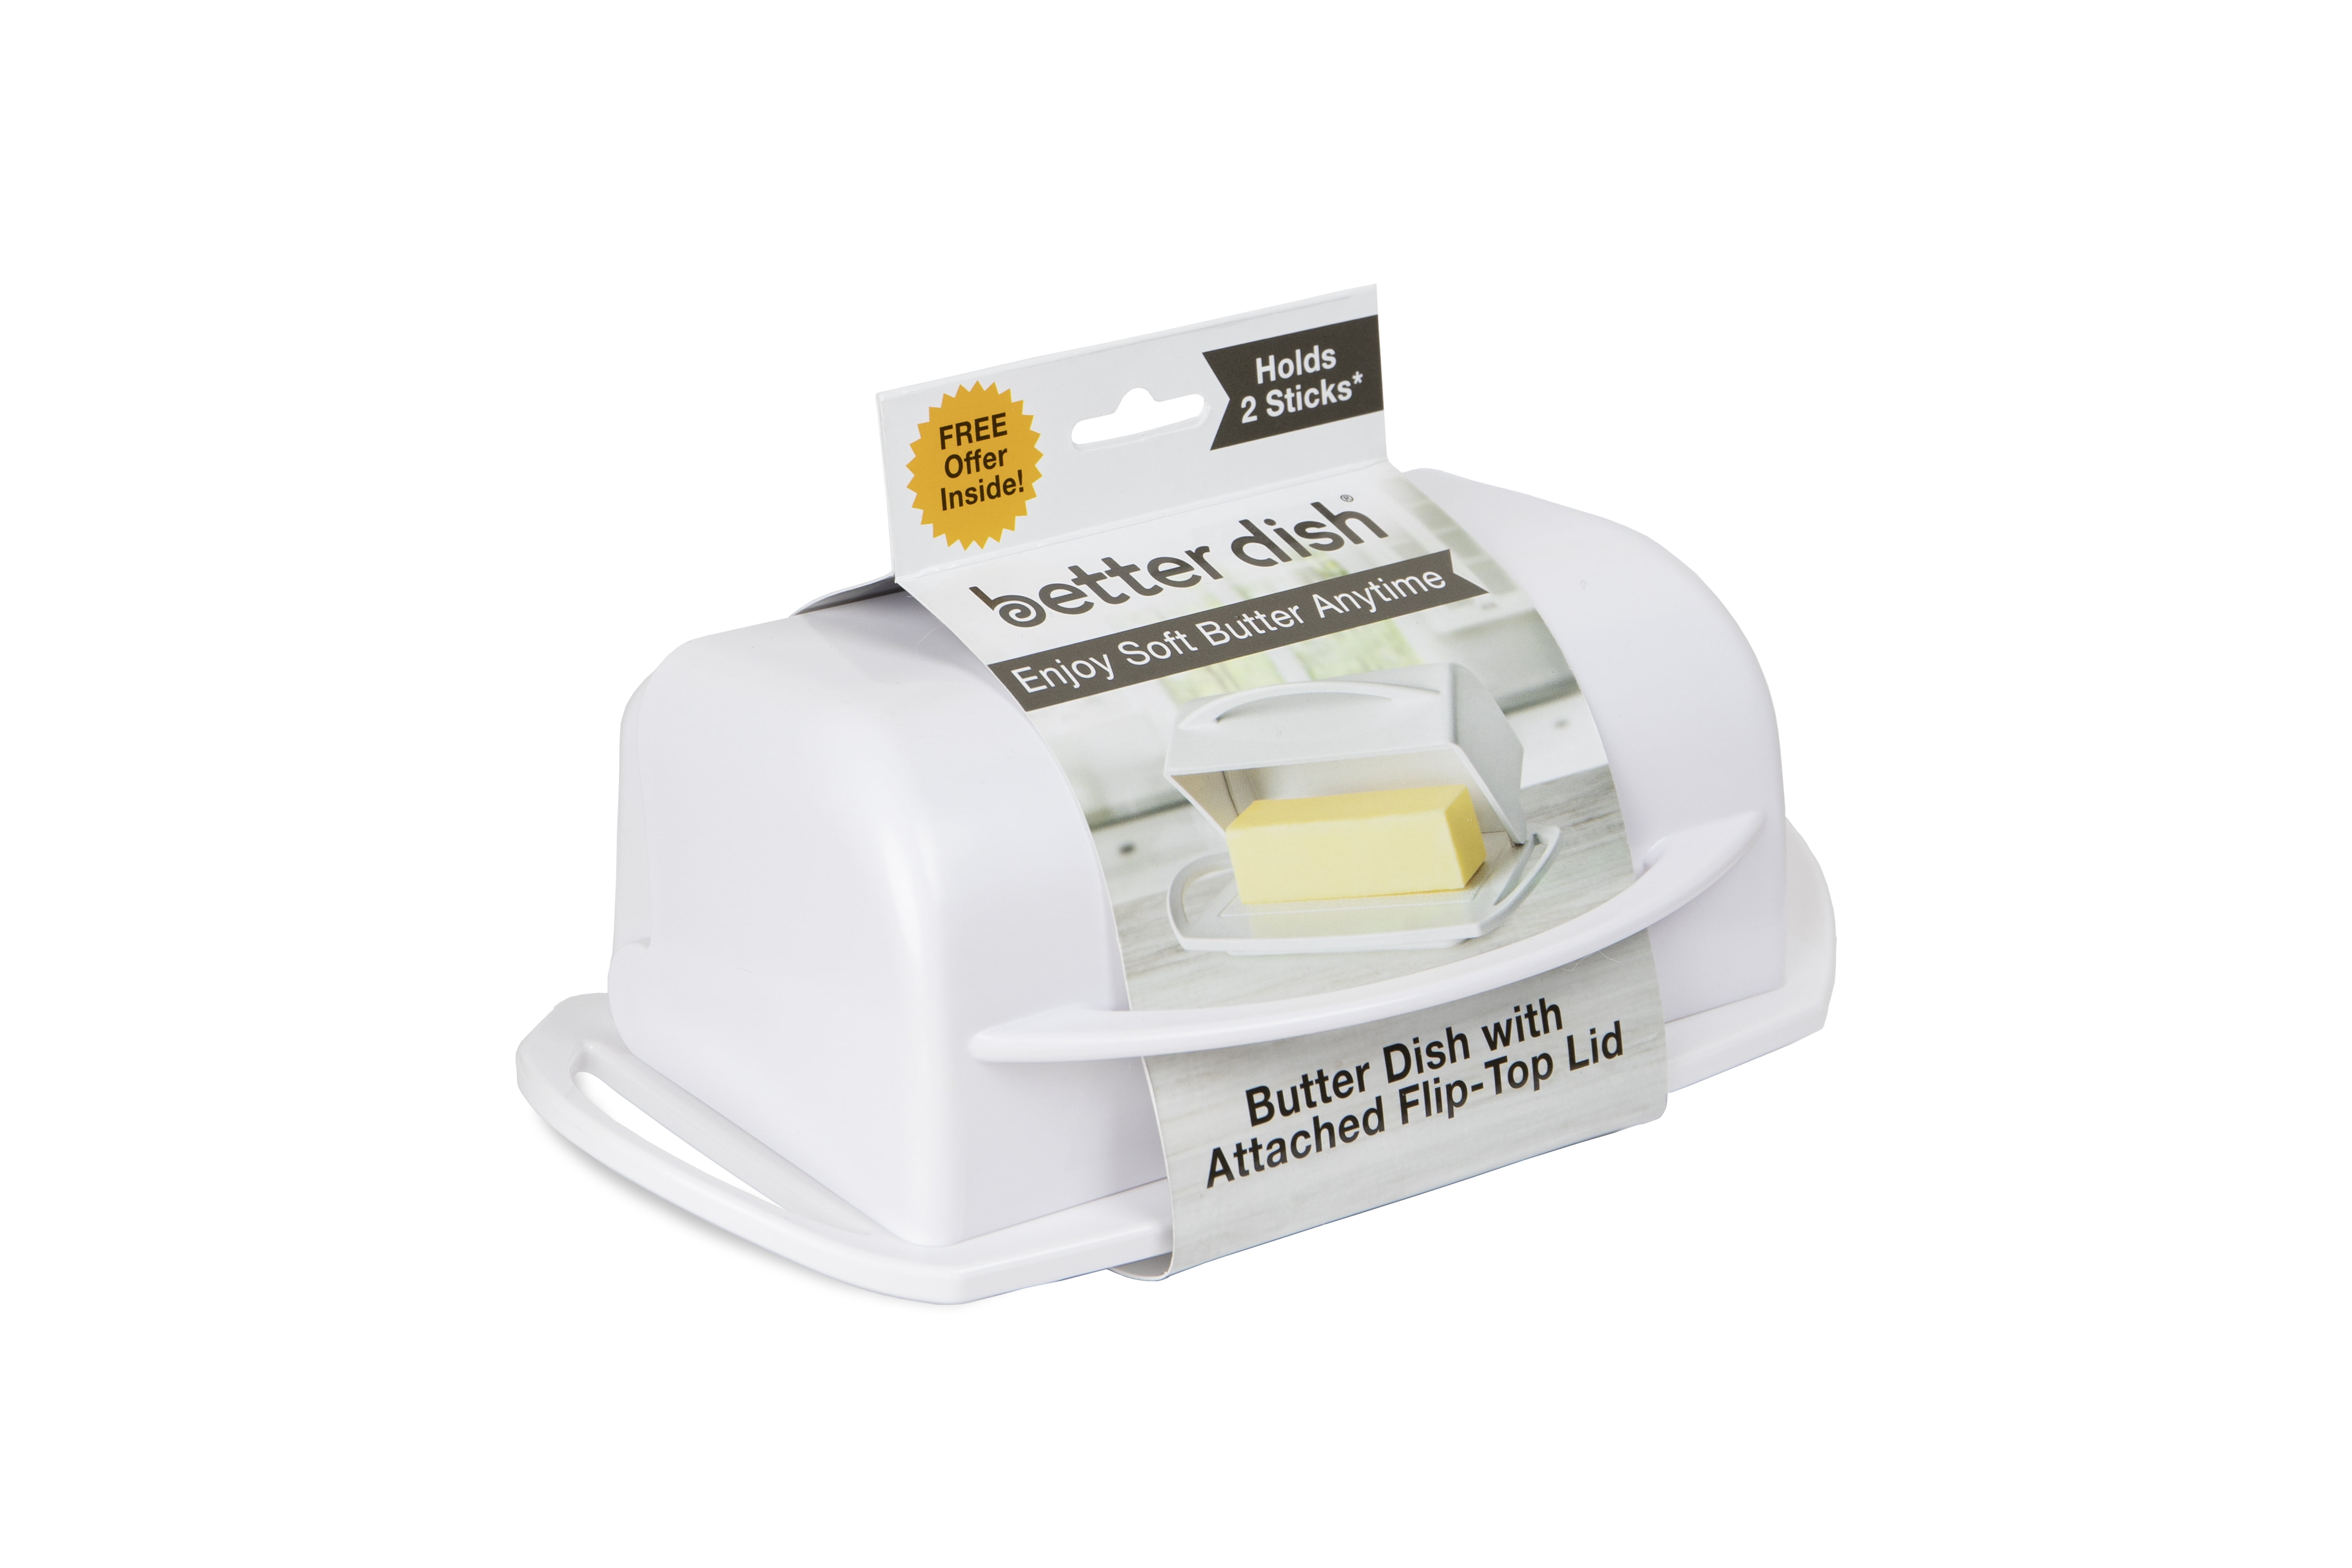 Better Dish Butter Dish with Flip Top lid